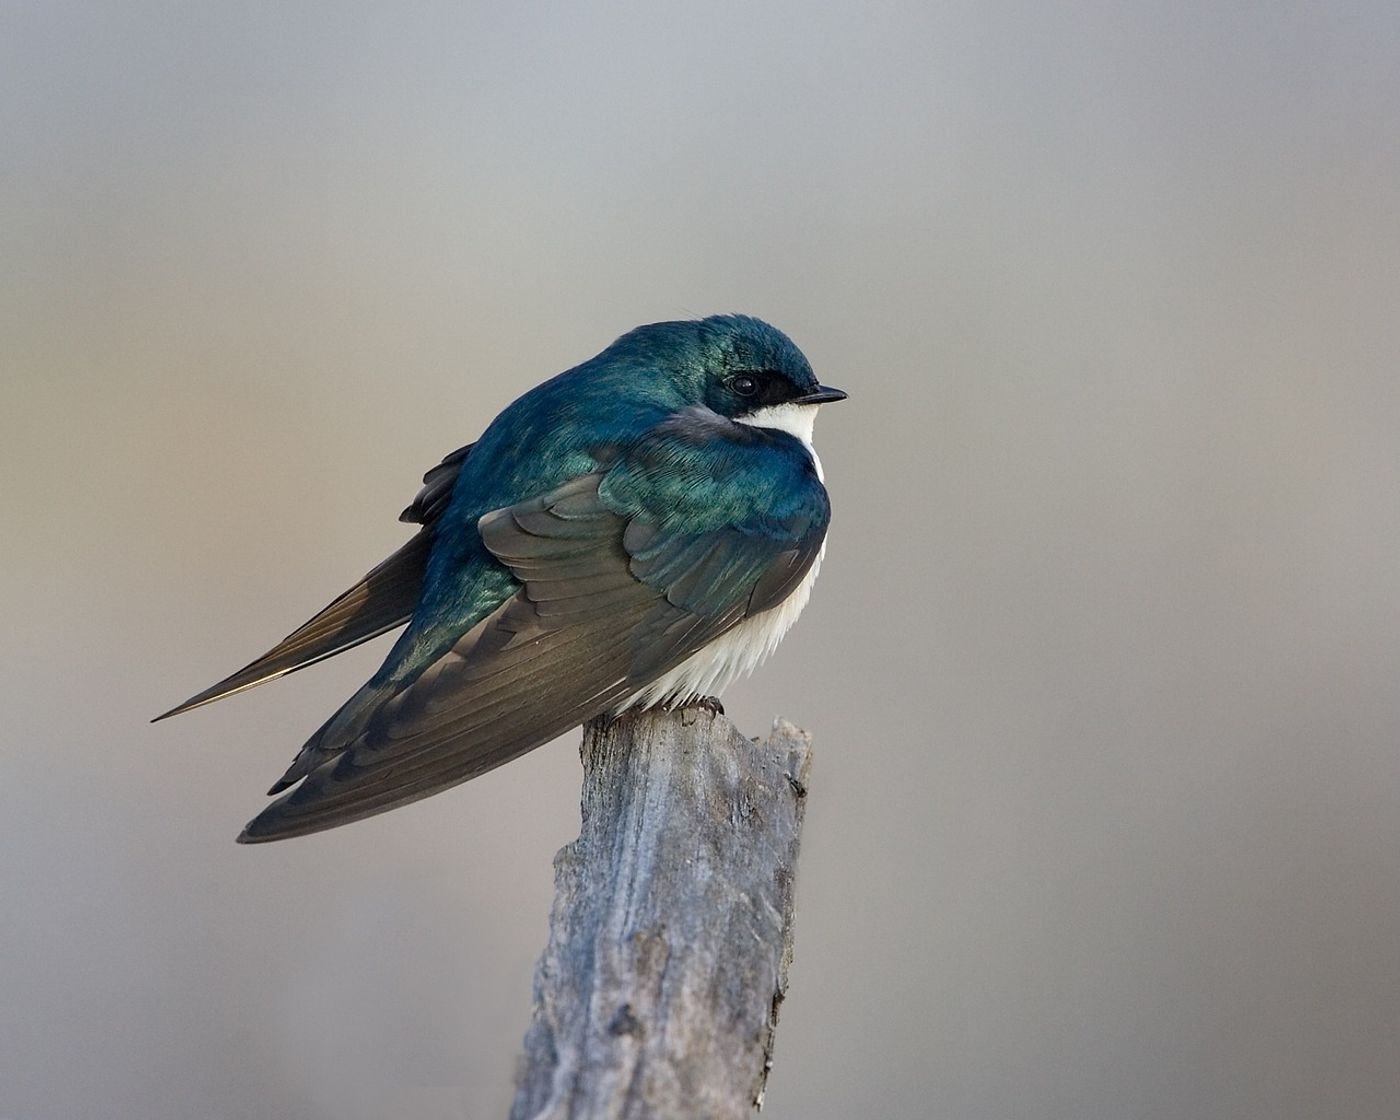 North American bird populations are in serious decline, according to a new study.